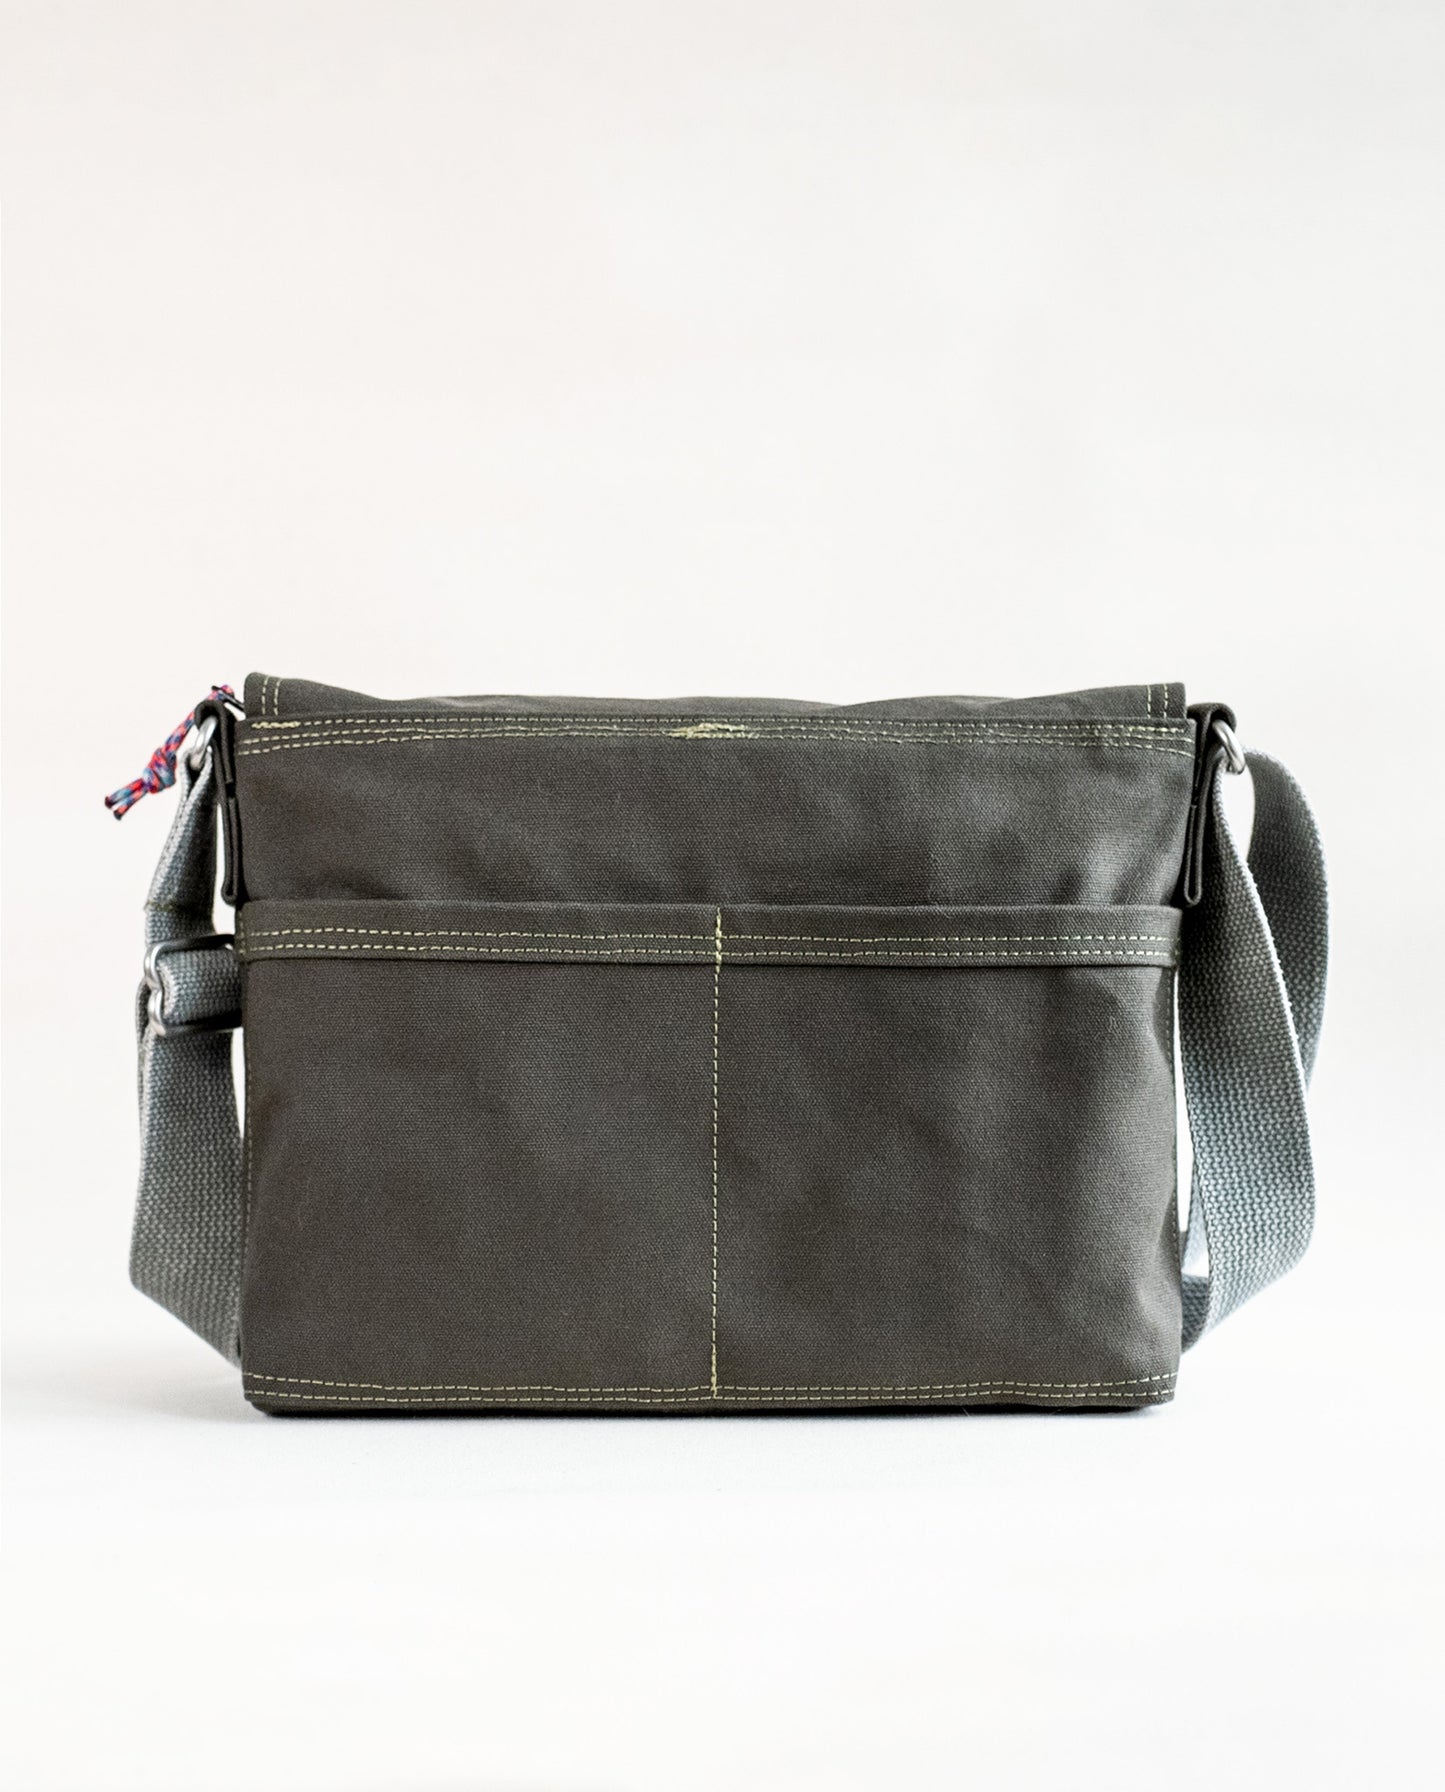 Back exterior pockets of Dock 5’s Chickadee Canvas Messenger Bag in olive featuring art from owner Natalija Walbridge